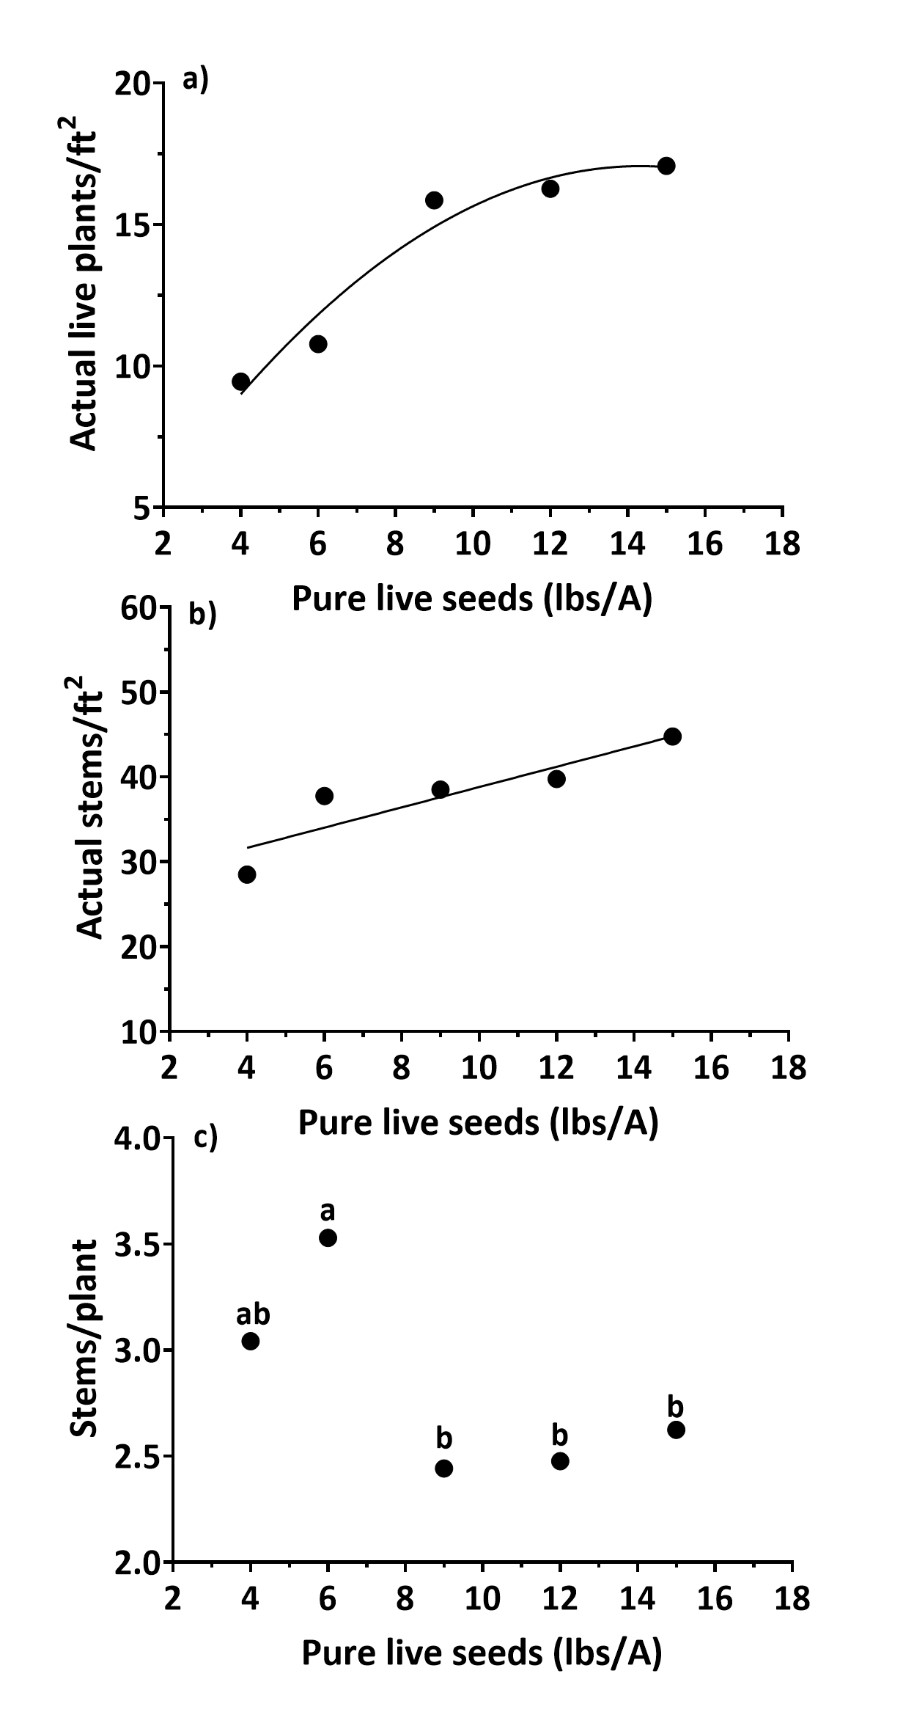 Three scatter plots showing the relationship between seeding rate and: a) actual live plants/ft2, b) stems/ft2, and c) stems/plant 